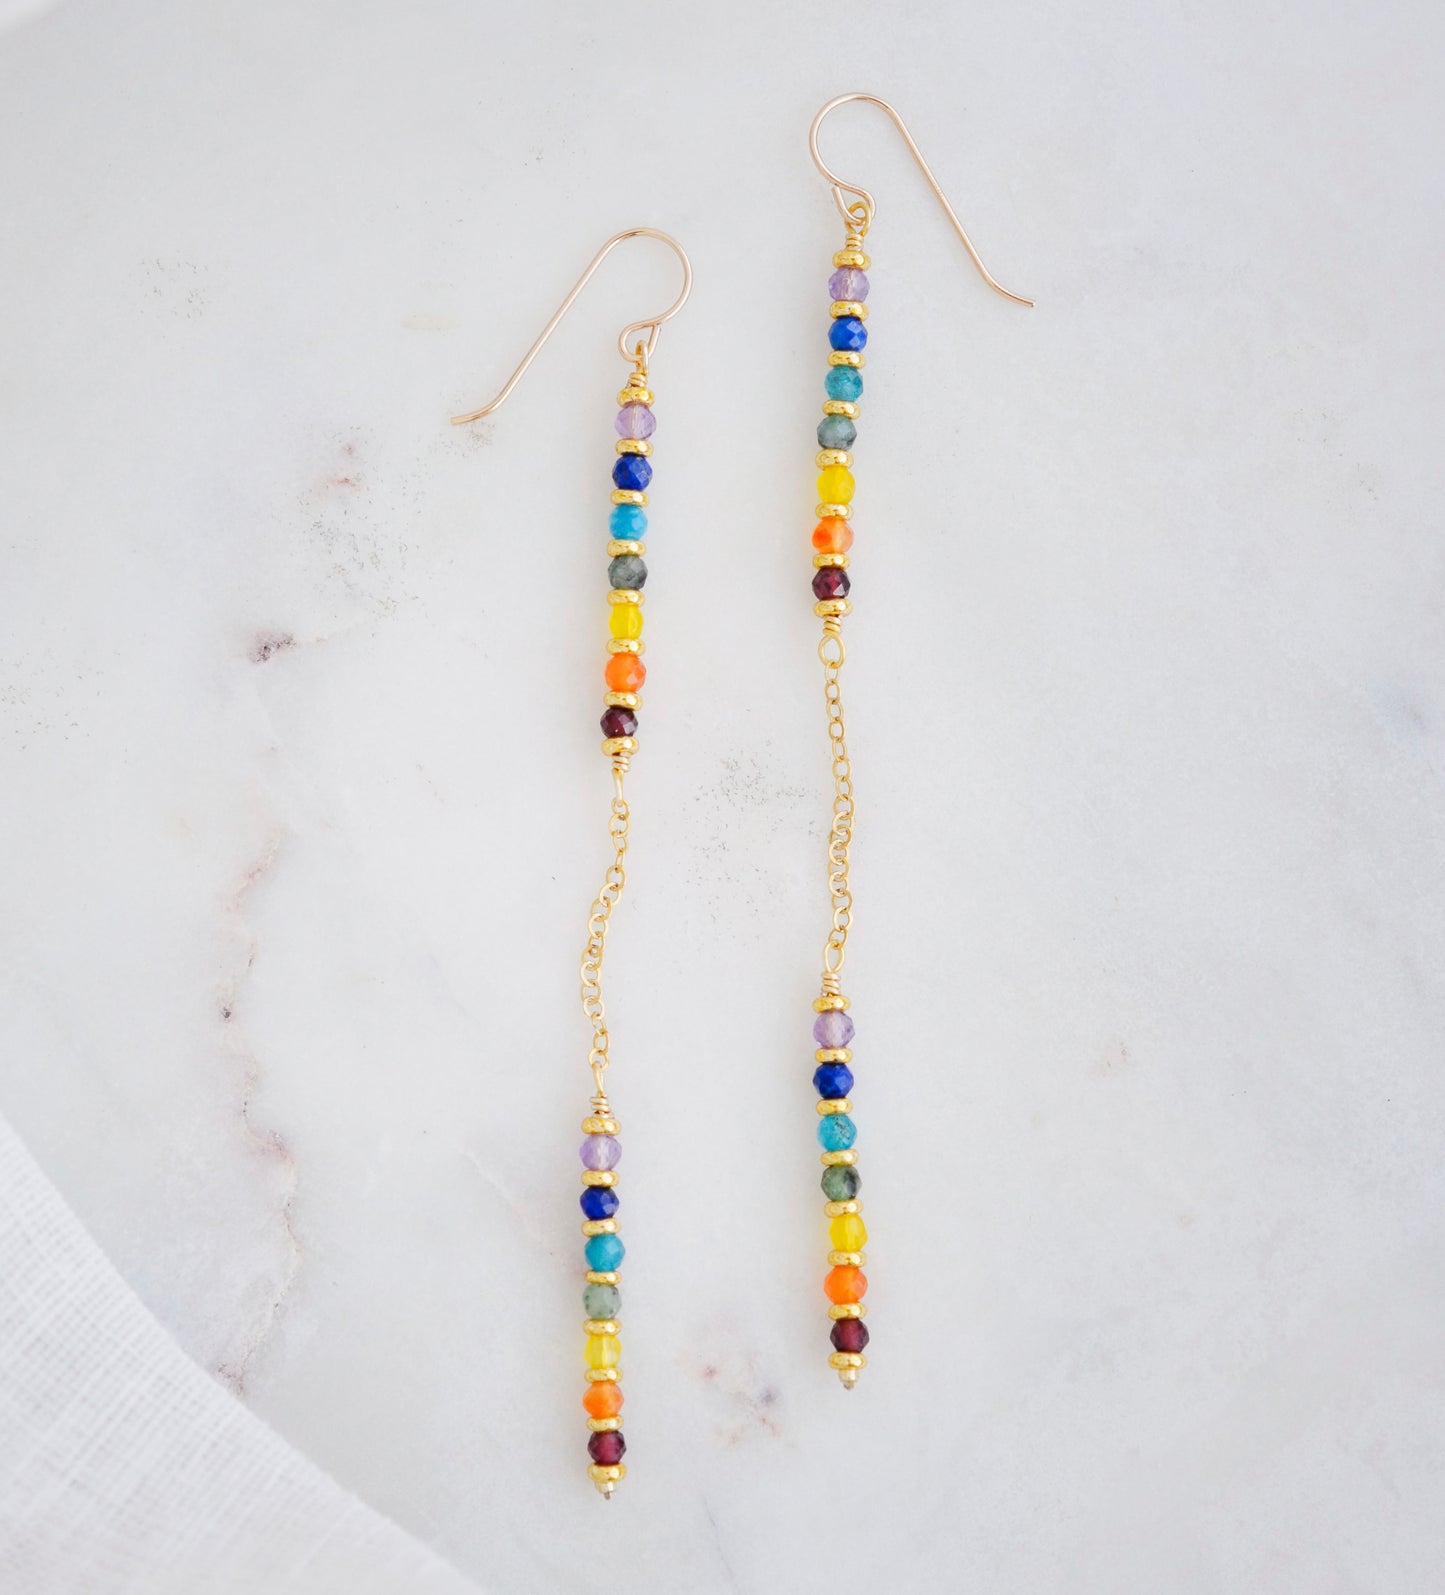 Two long, straight bars of crystals arranged in a rainbow pattern separated by a dainty chain. The gold style is shown showing the flexible chain.